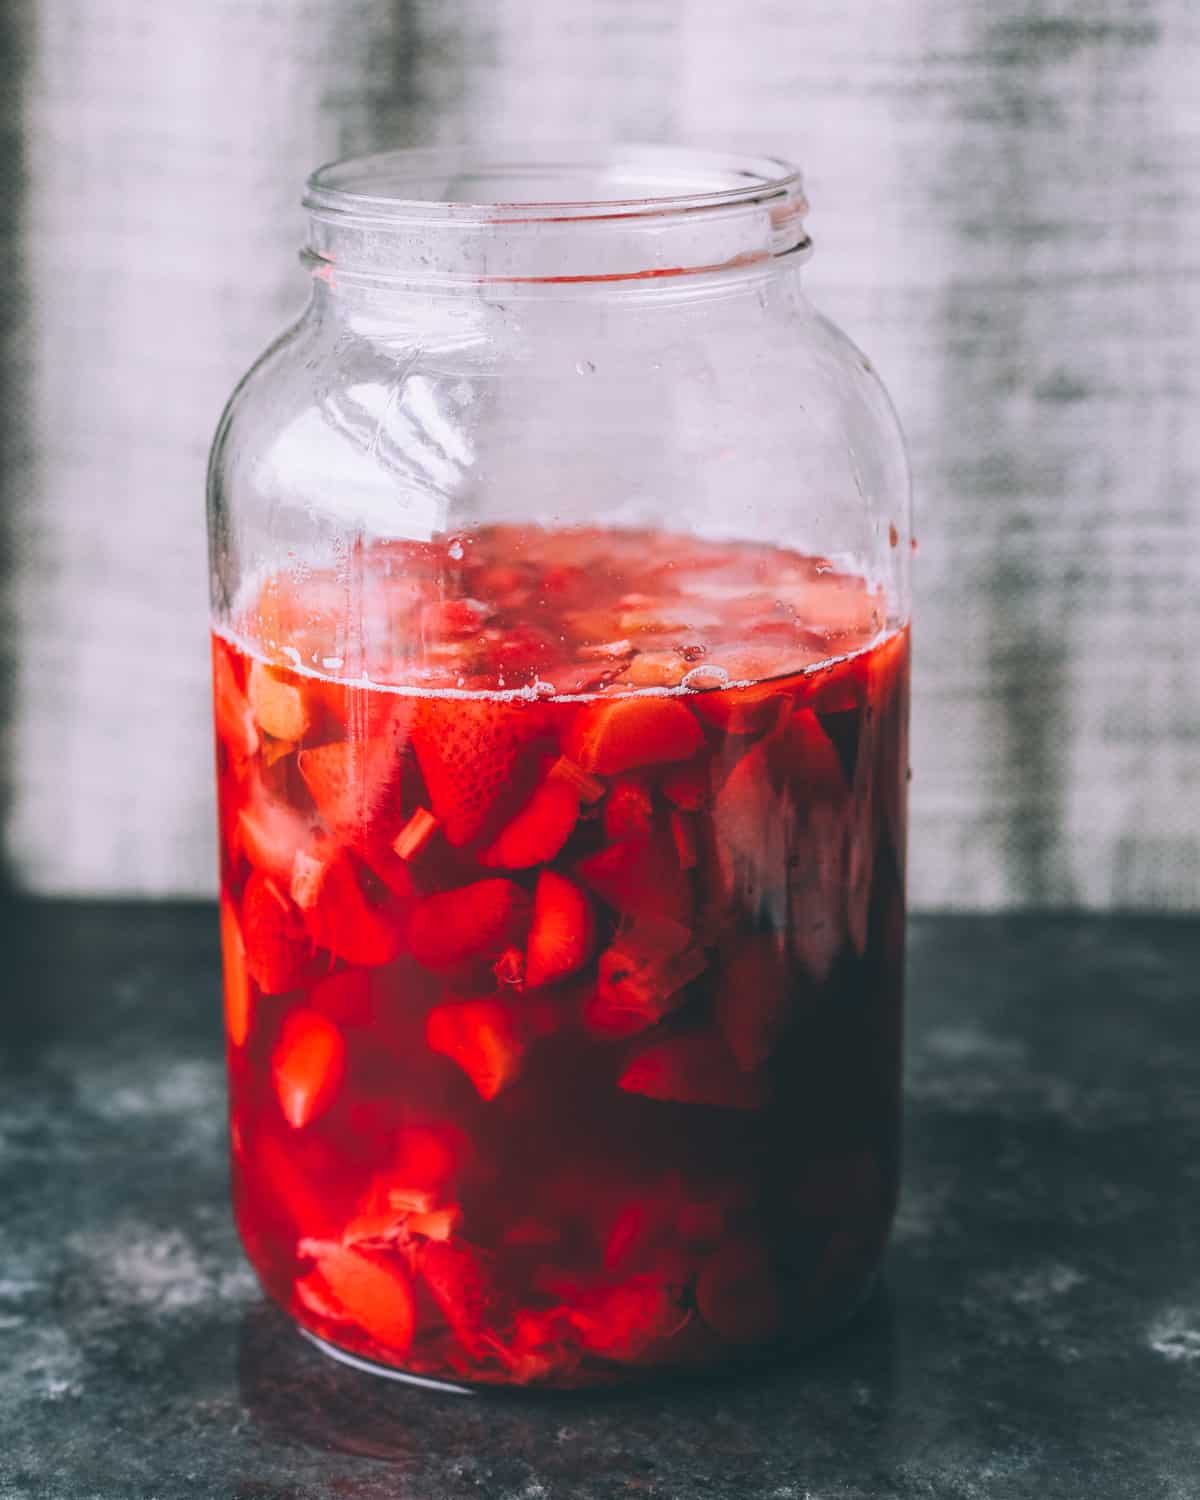 strawberries and rhubarb in a gallon jar to ferment